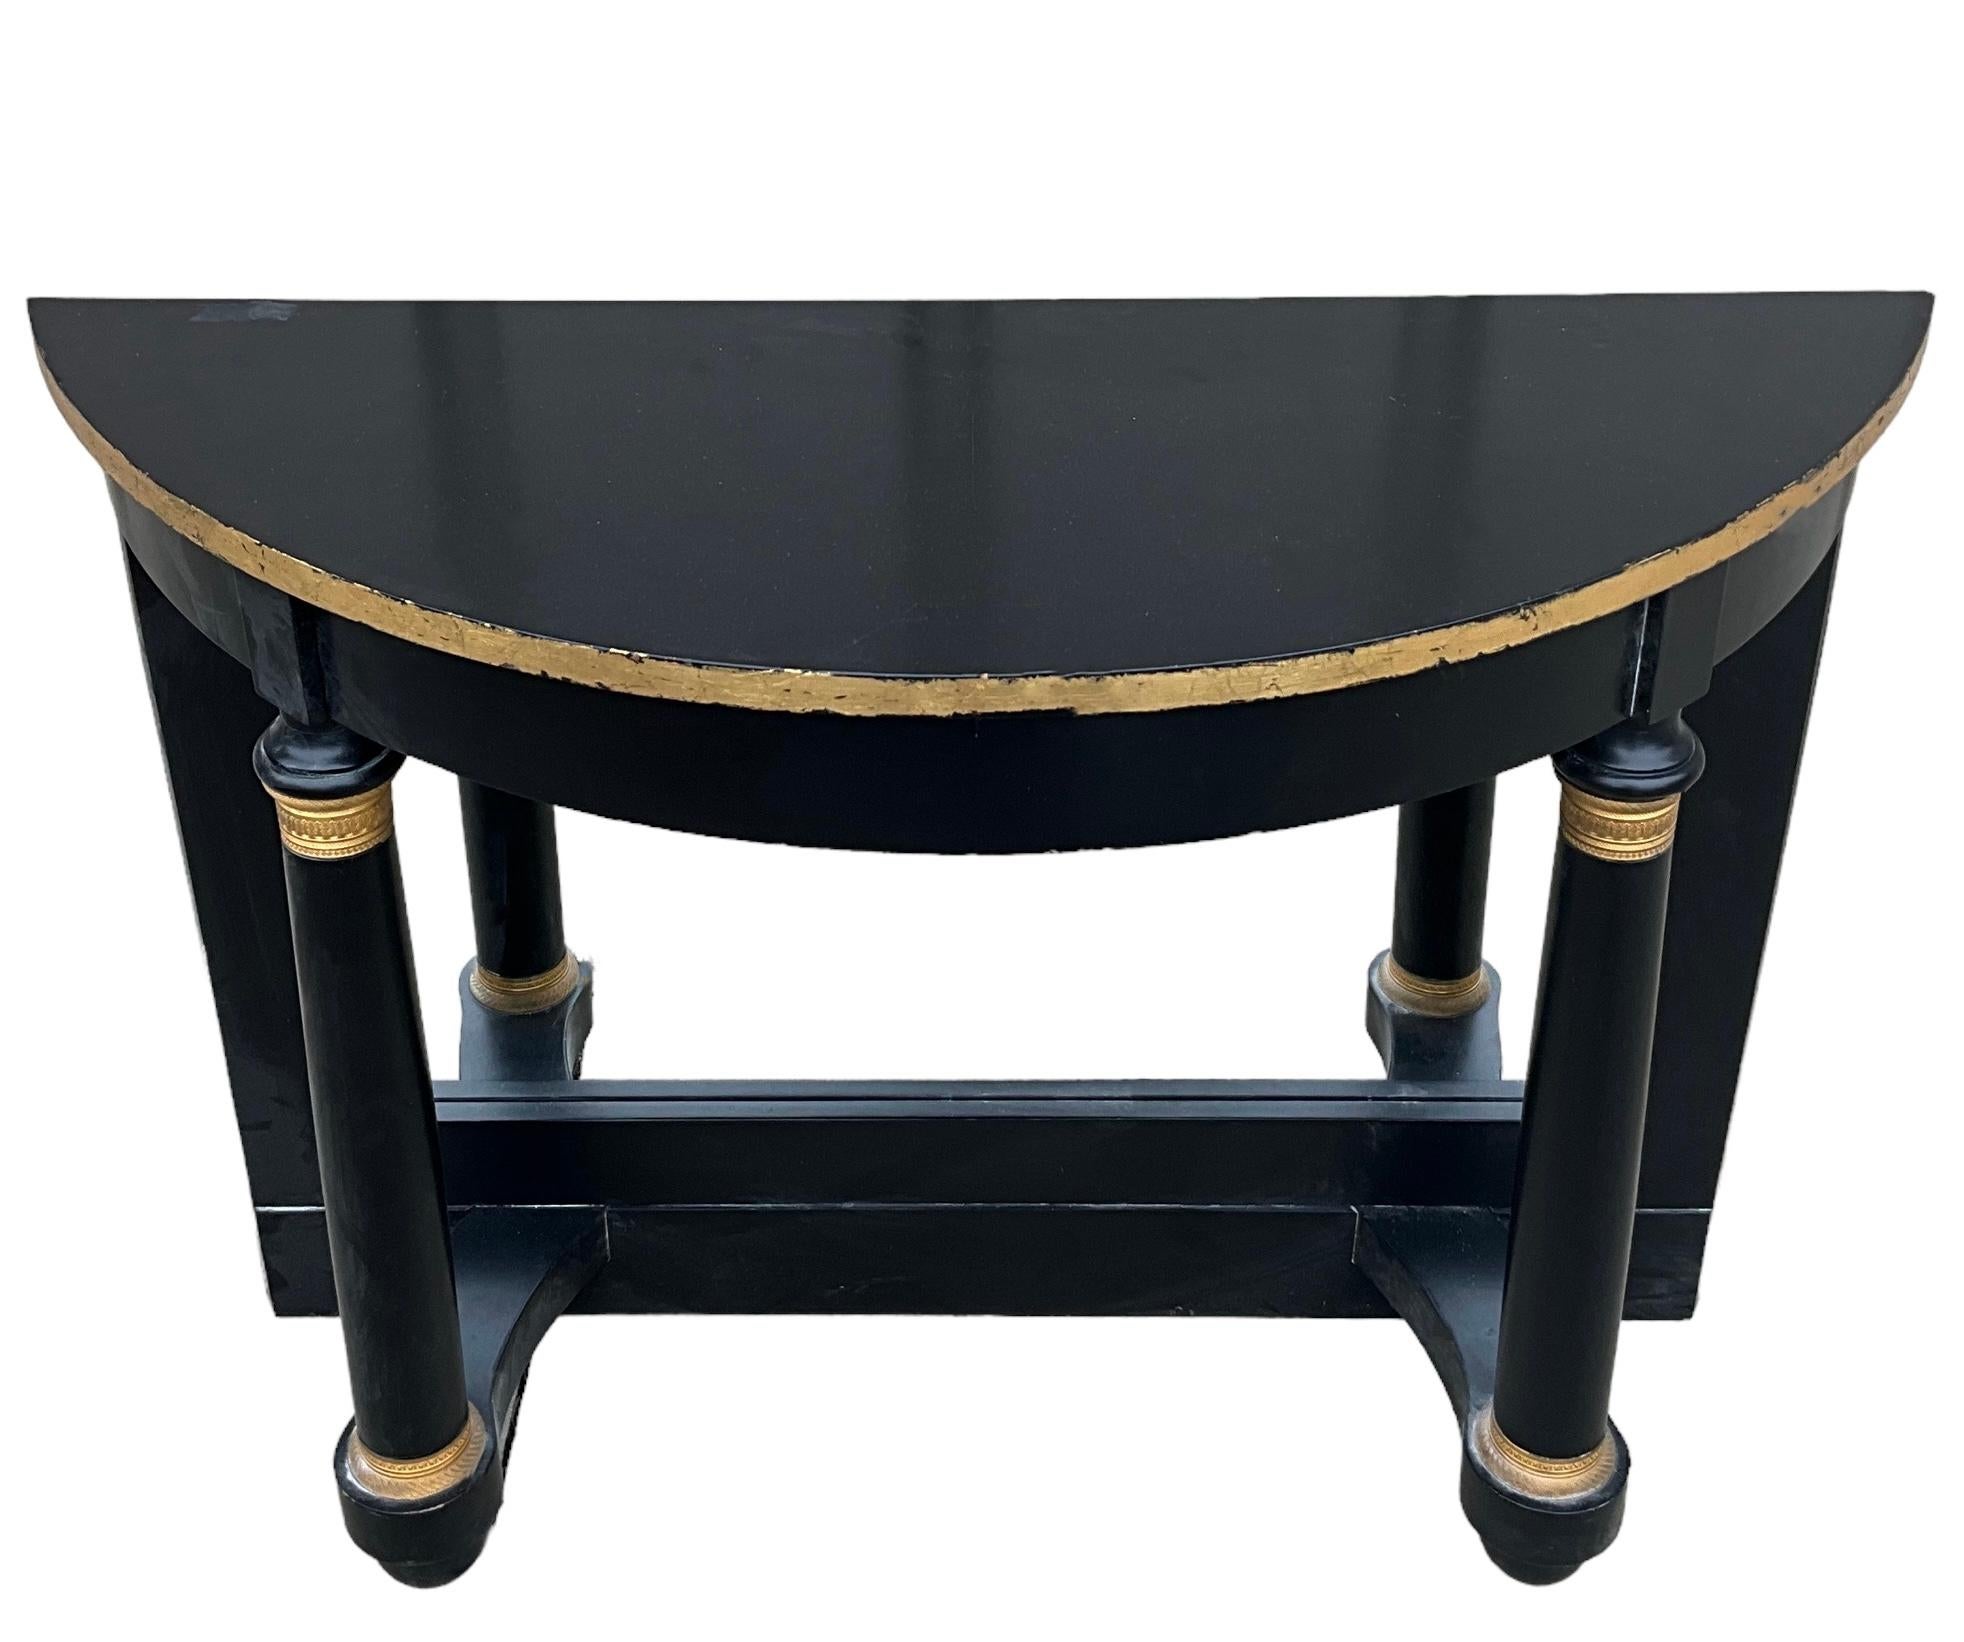 French Neo-Classical Style Maison Jansen Black & Gilt Bronze Console Tables -S/2 For Sale 1